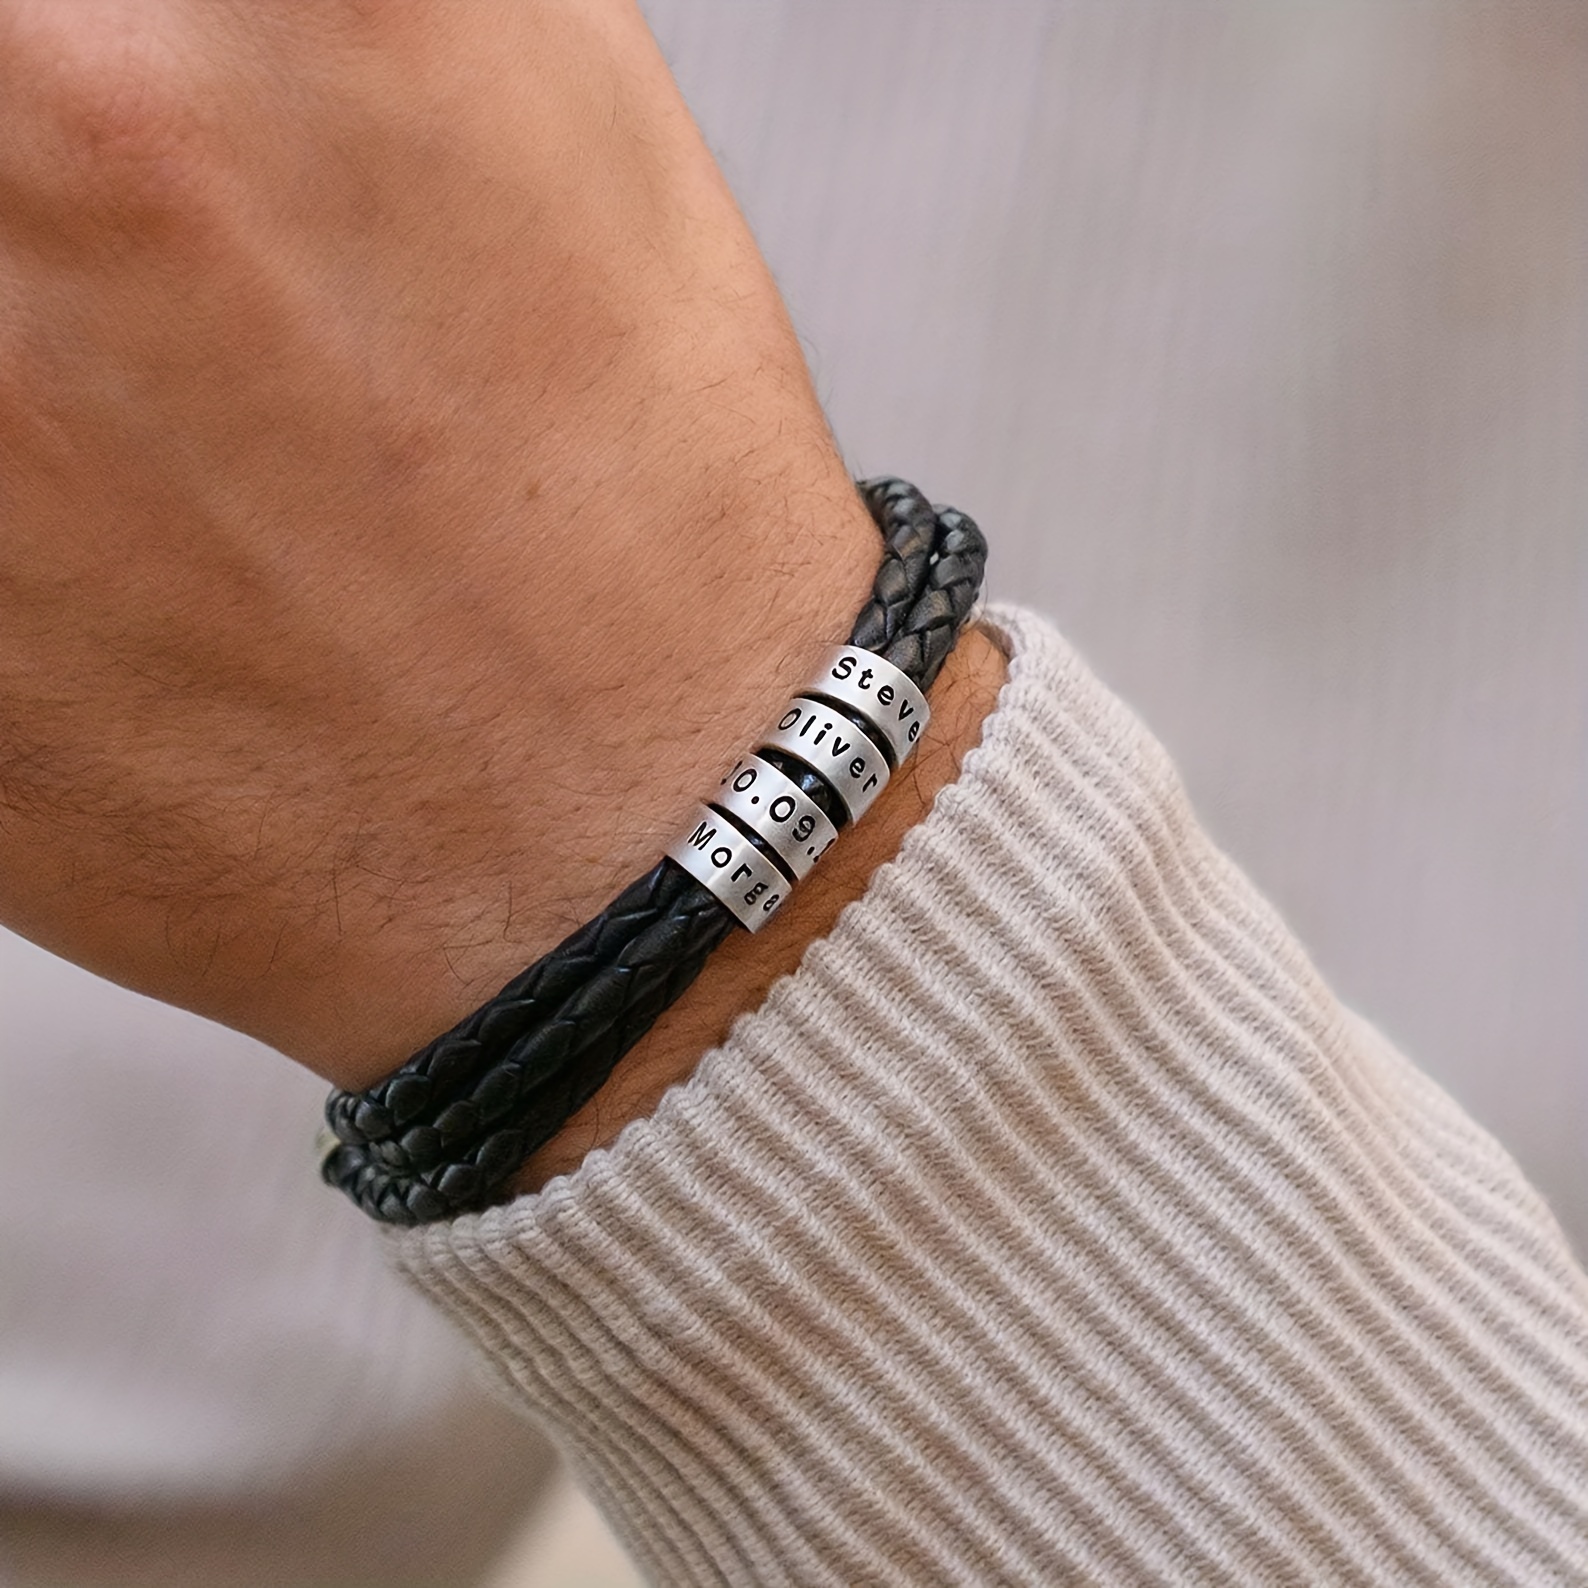 Personalized Braided Leather Bracelet For Men